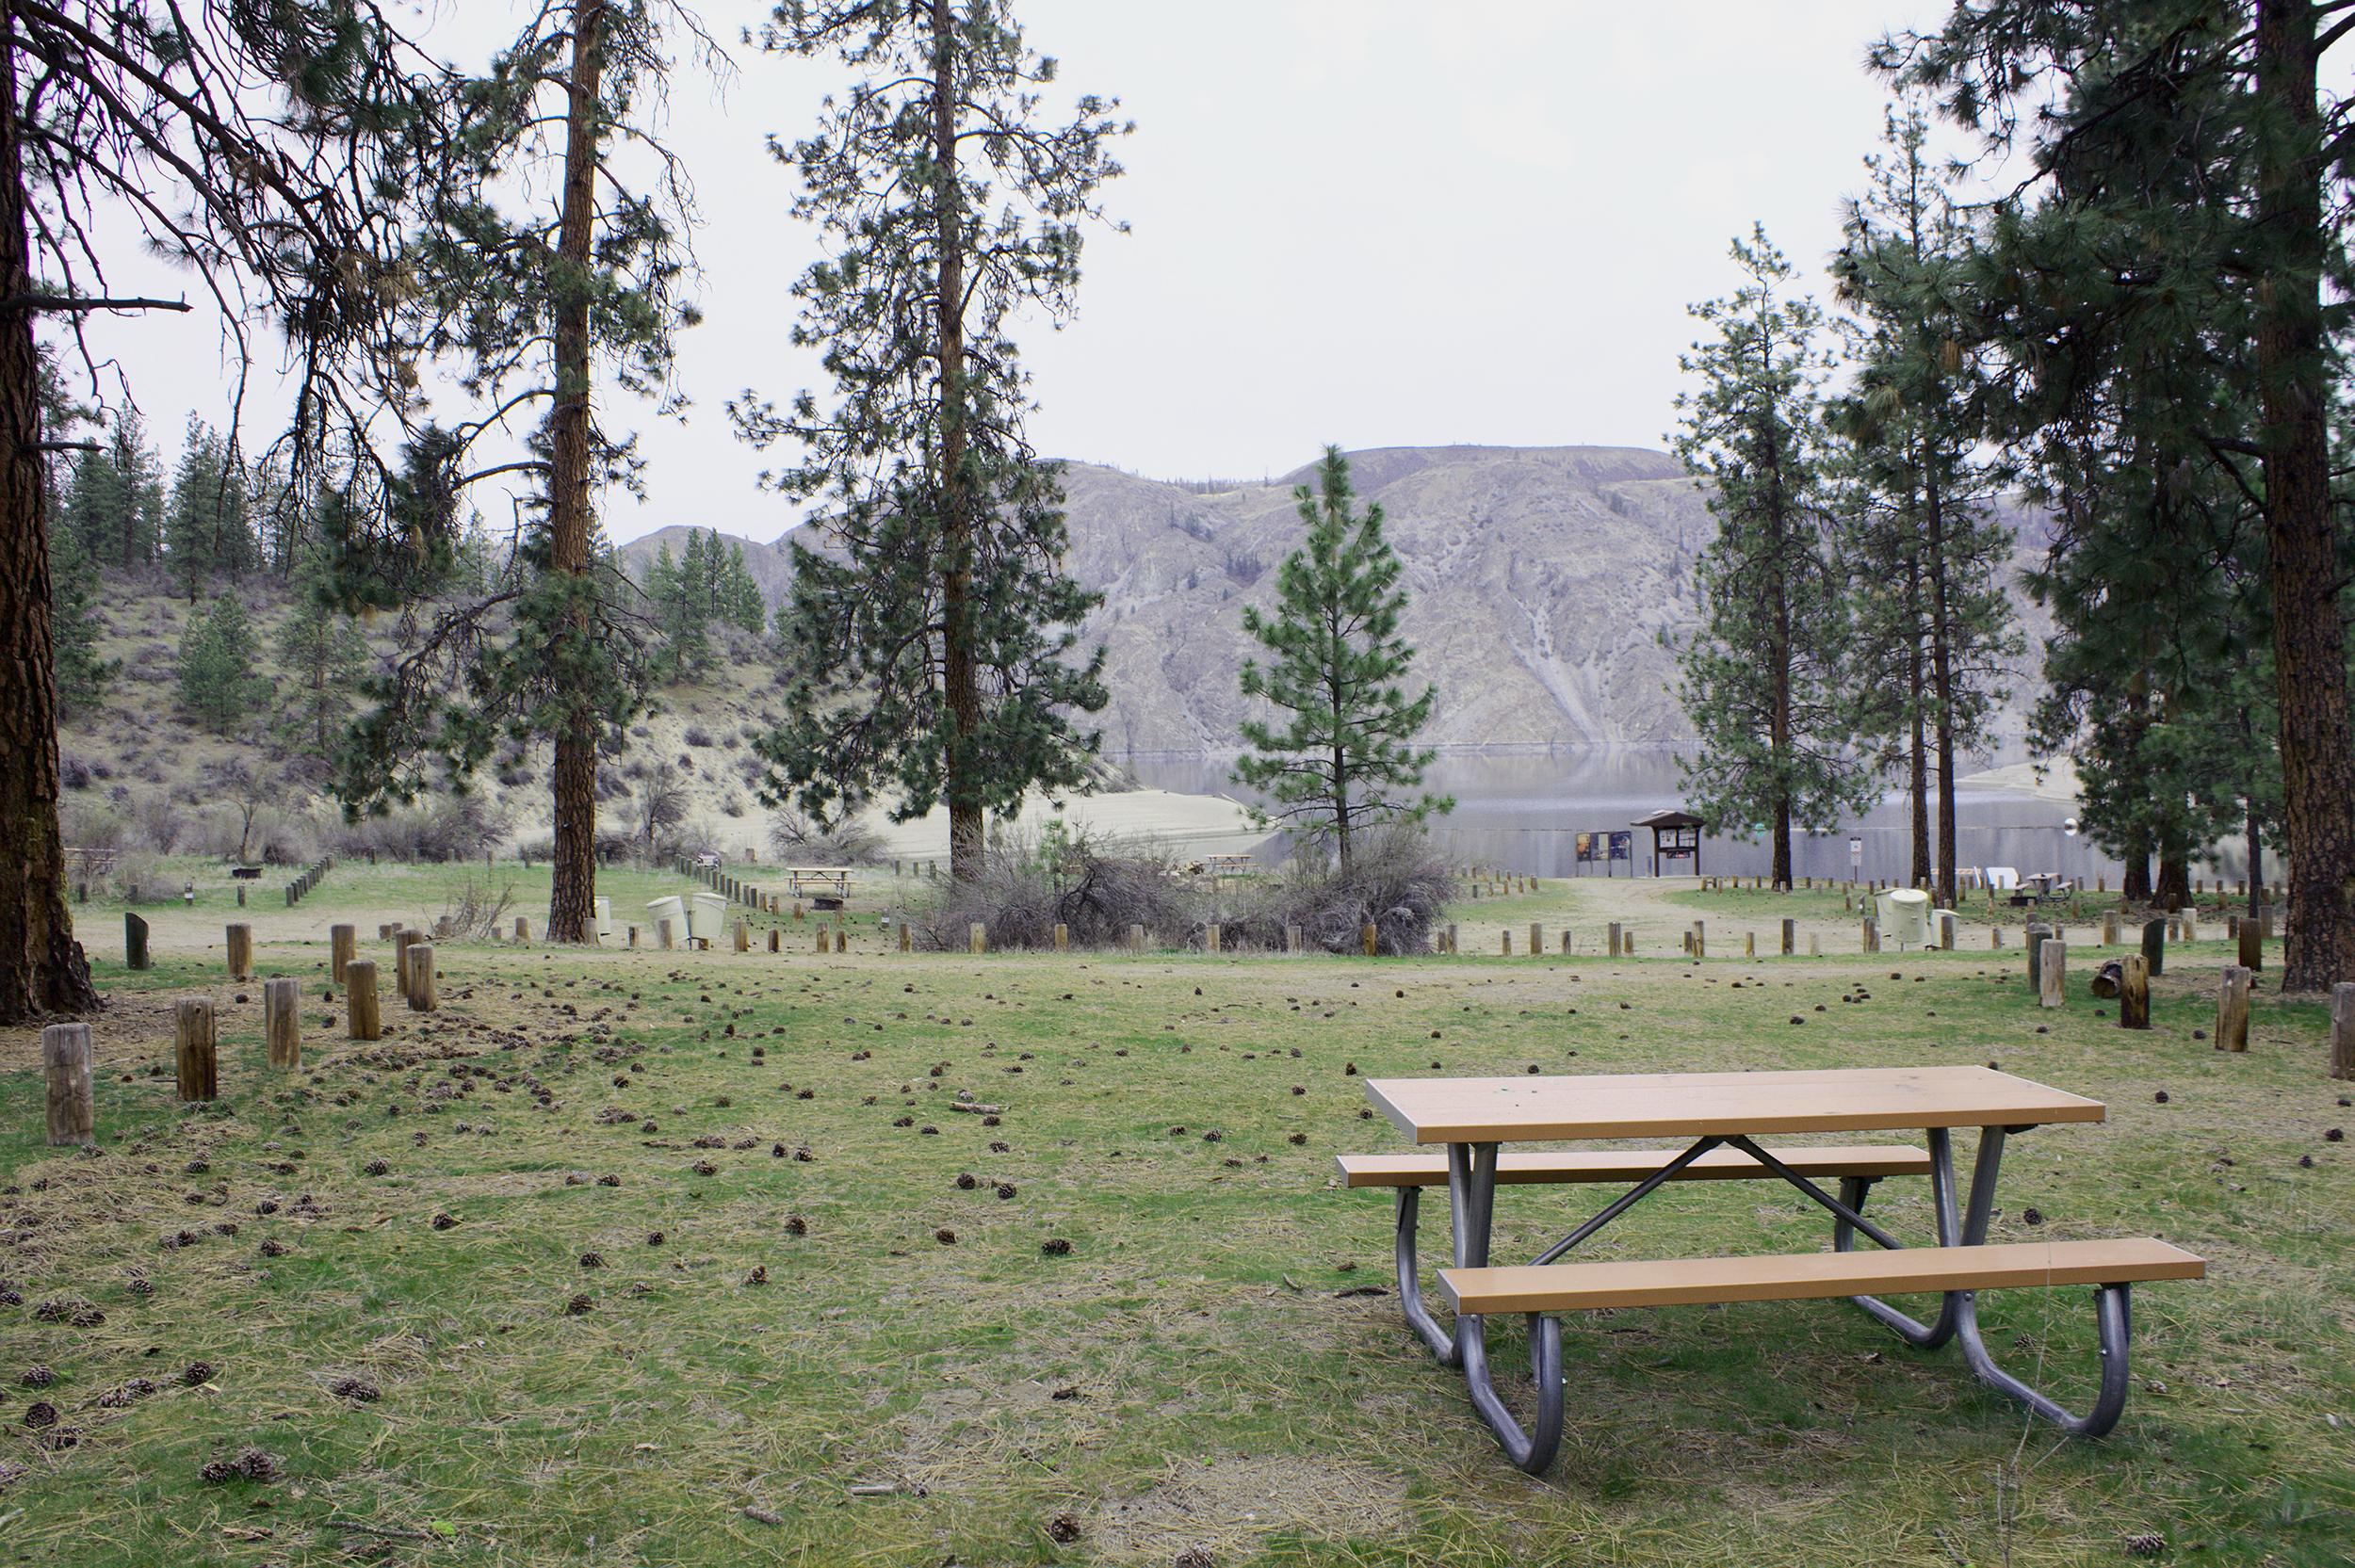 Looking toward the lake and the boat ramp, a campsite with a picnic table and gravel road in front.